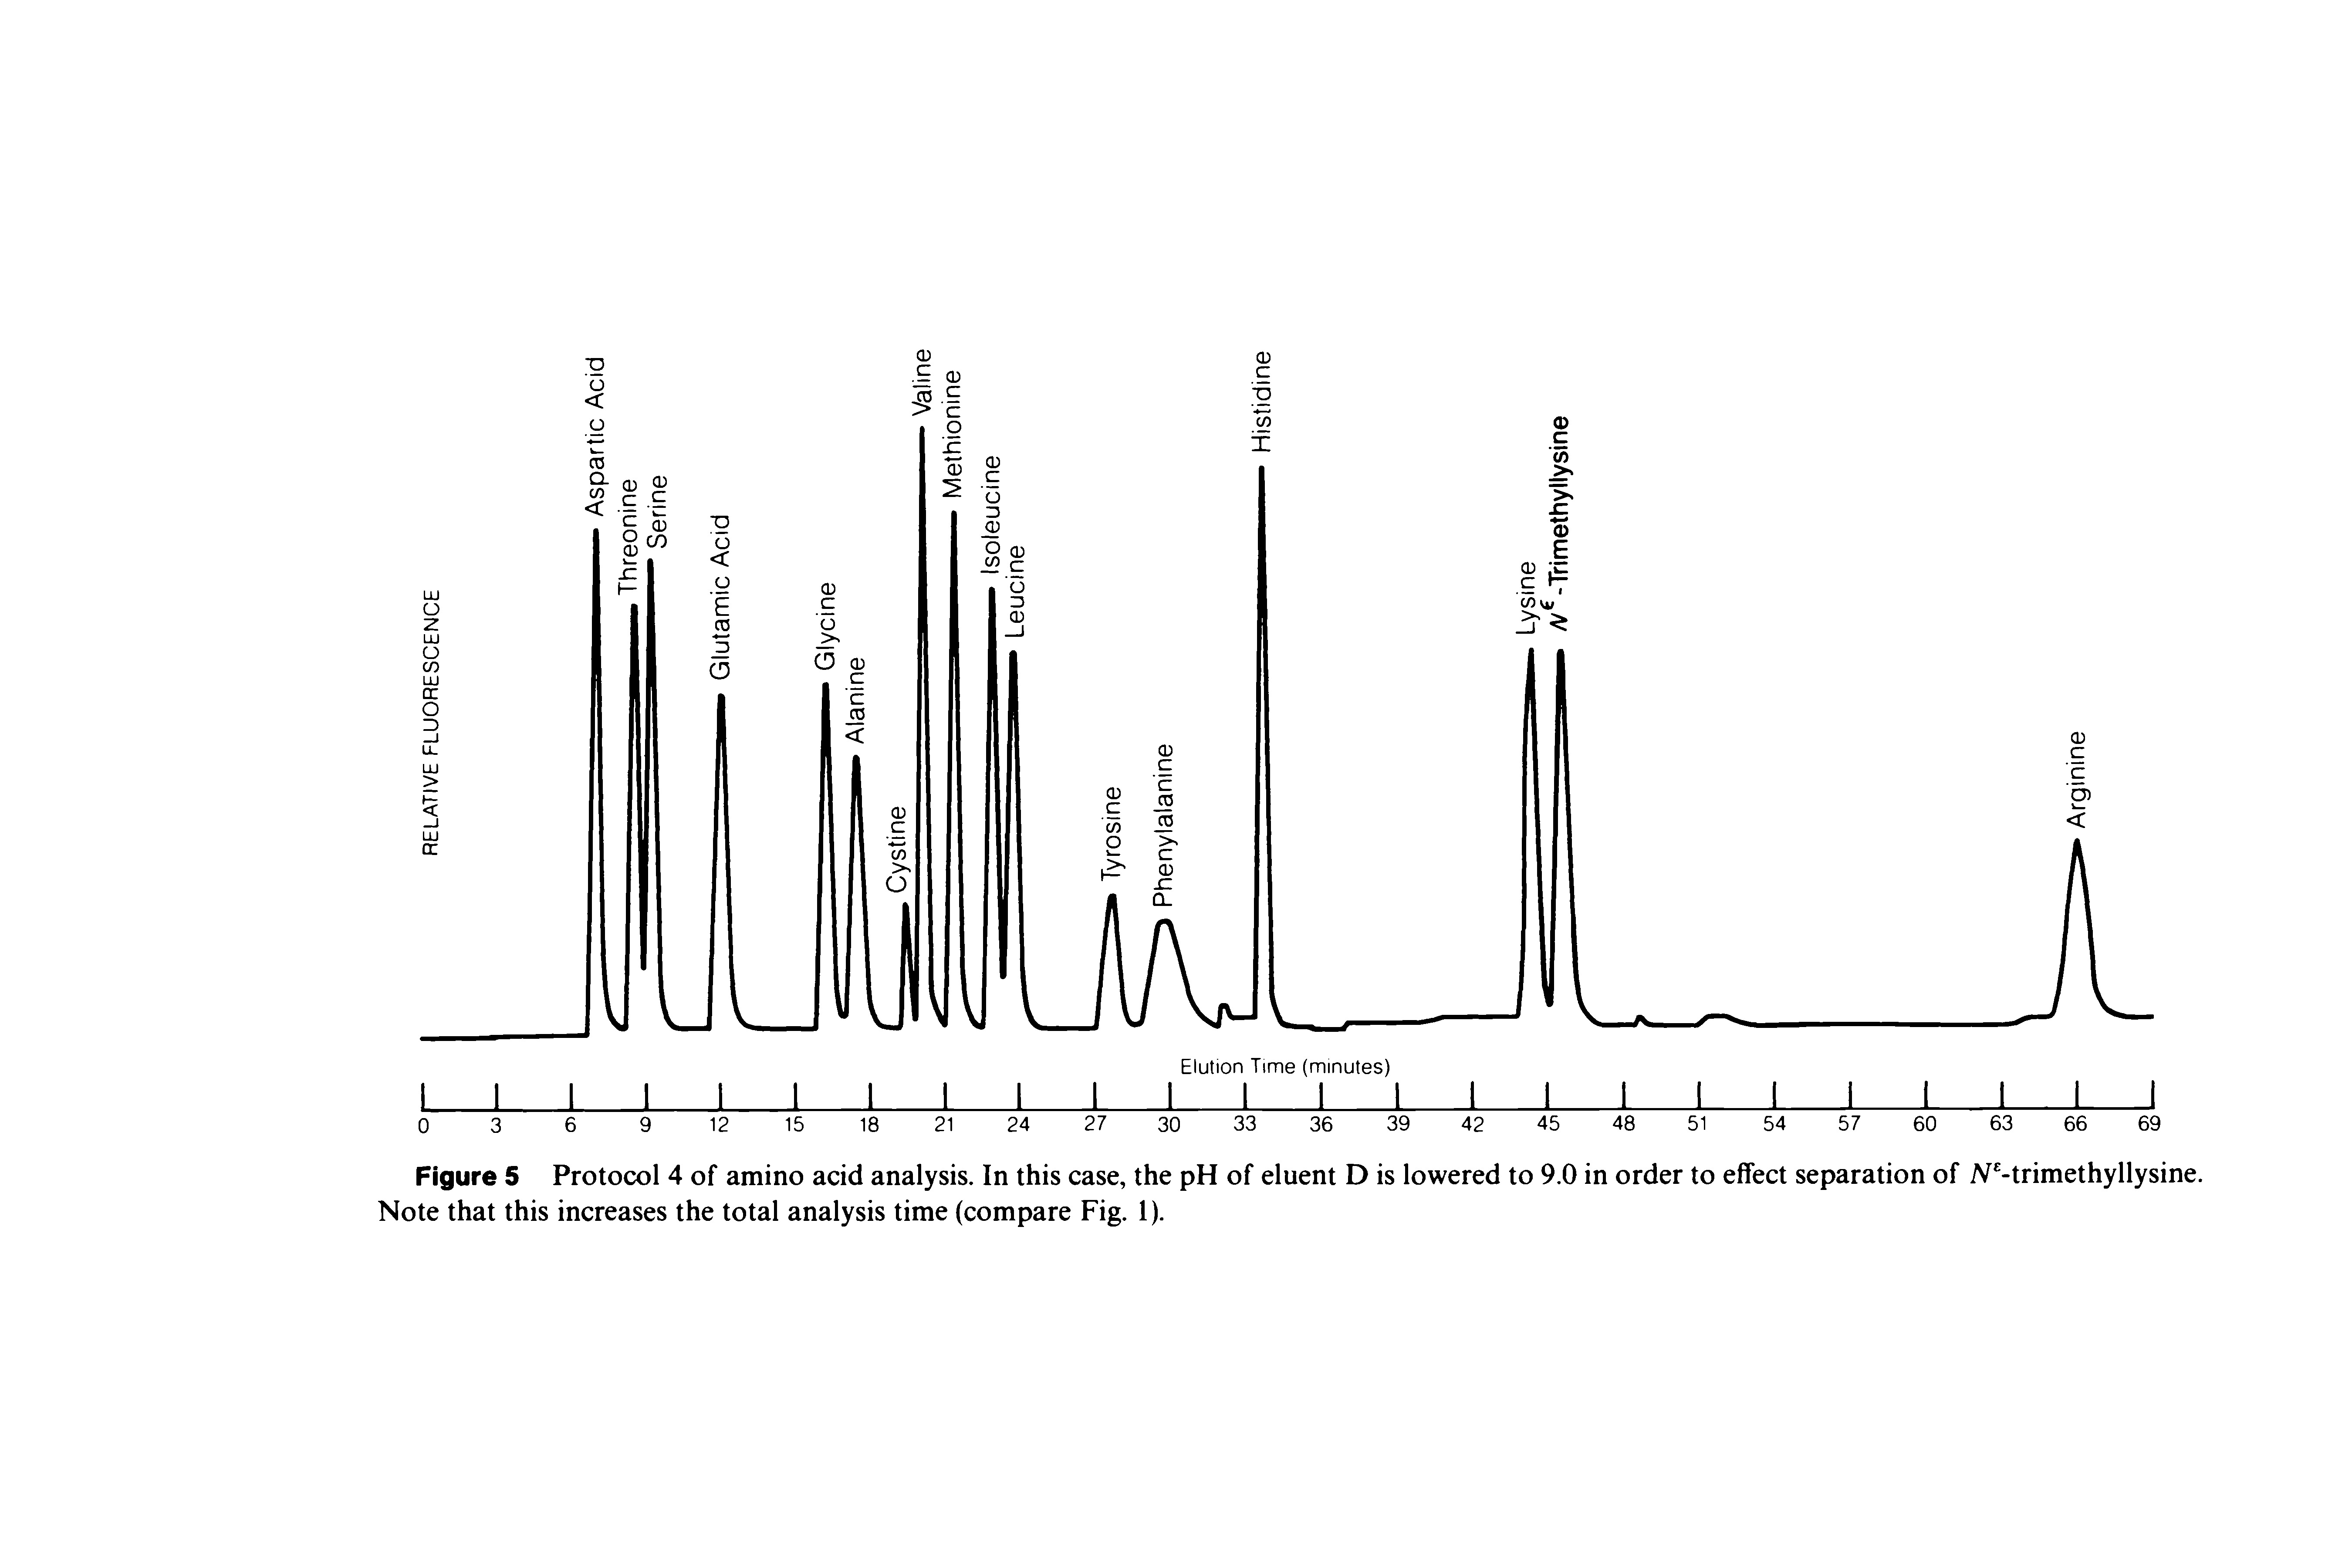 Figure 5 Protocol 4 of amino acid analysis. In this case, the pH of eluent D is lowered to 9.0 in order to effect separation of N -trimethyllysine. Note that this increases the total analysis time (compare Fig. 1).